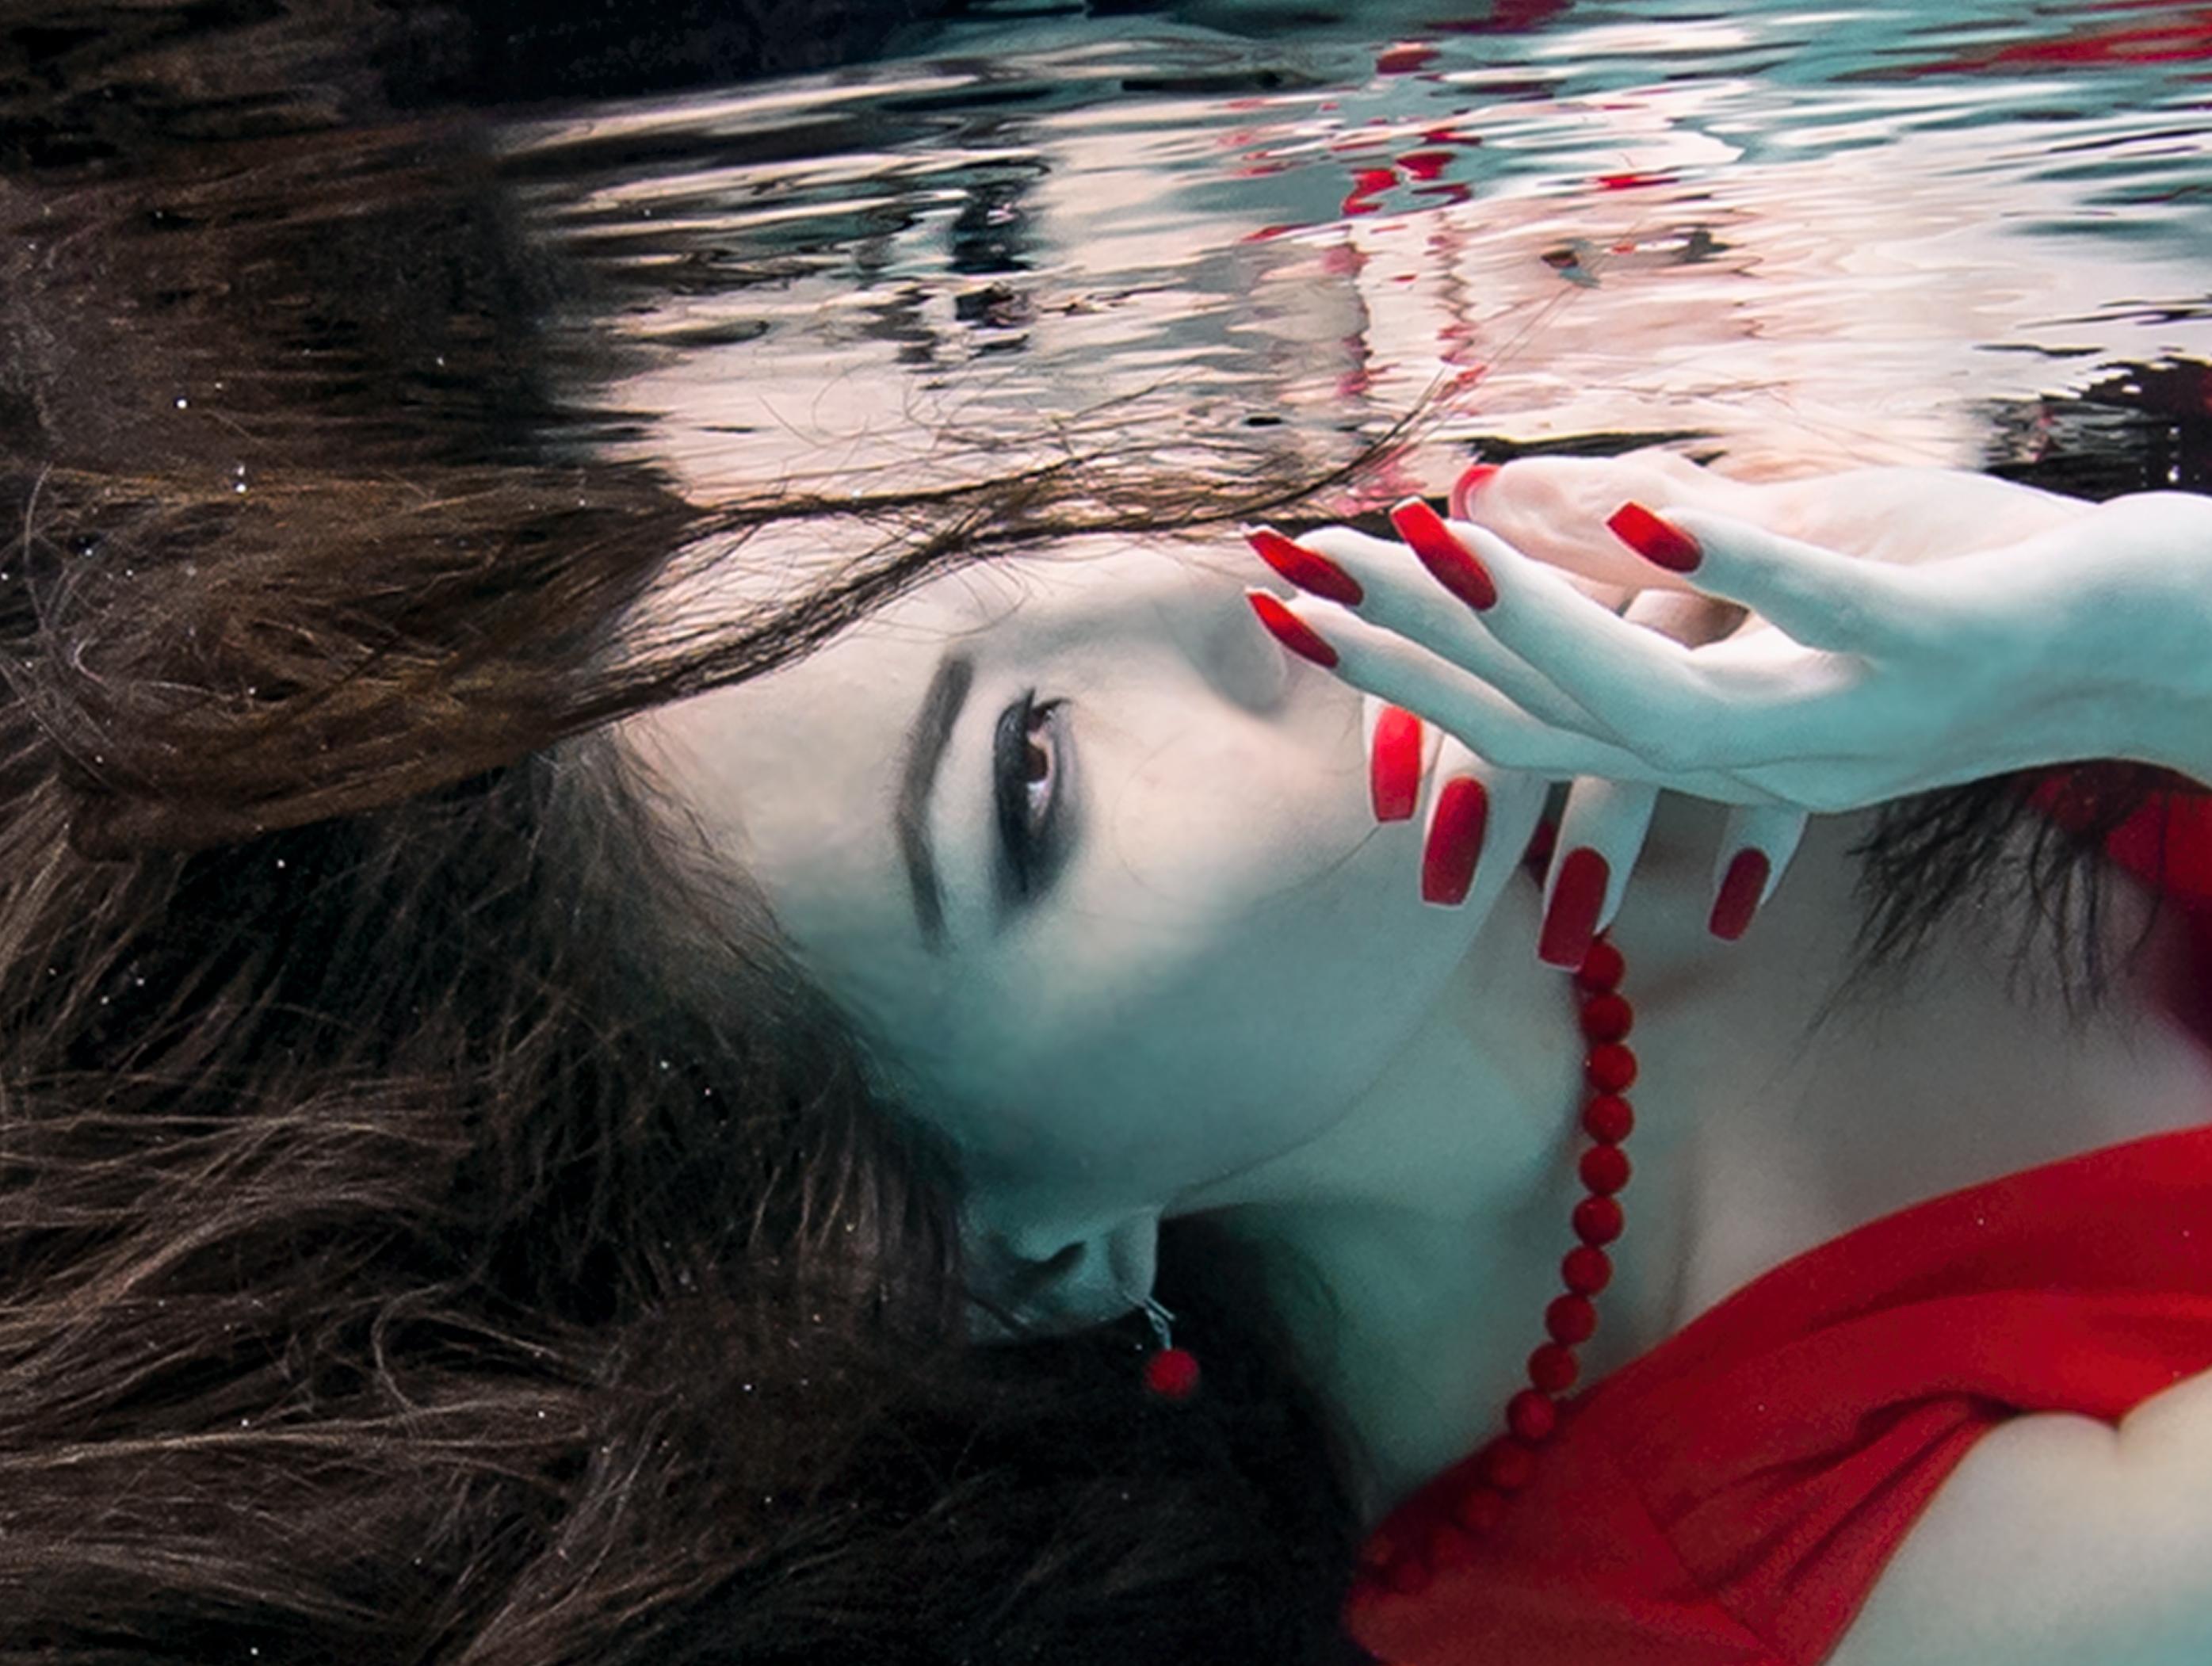 Underwater photograph of a gorgeous girl with dark hair in red dress.

Original gallery quality print on archival metallic paper signed by the artist.
Paper size: 36